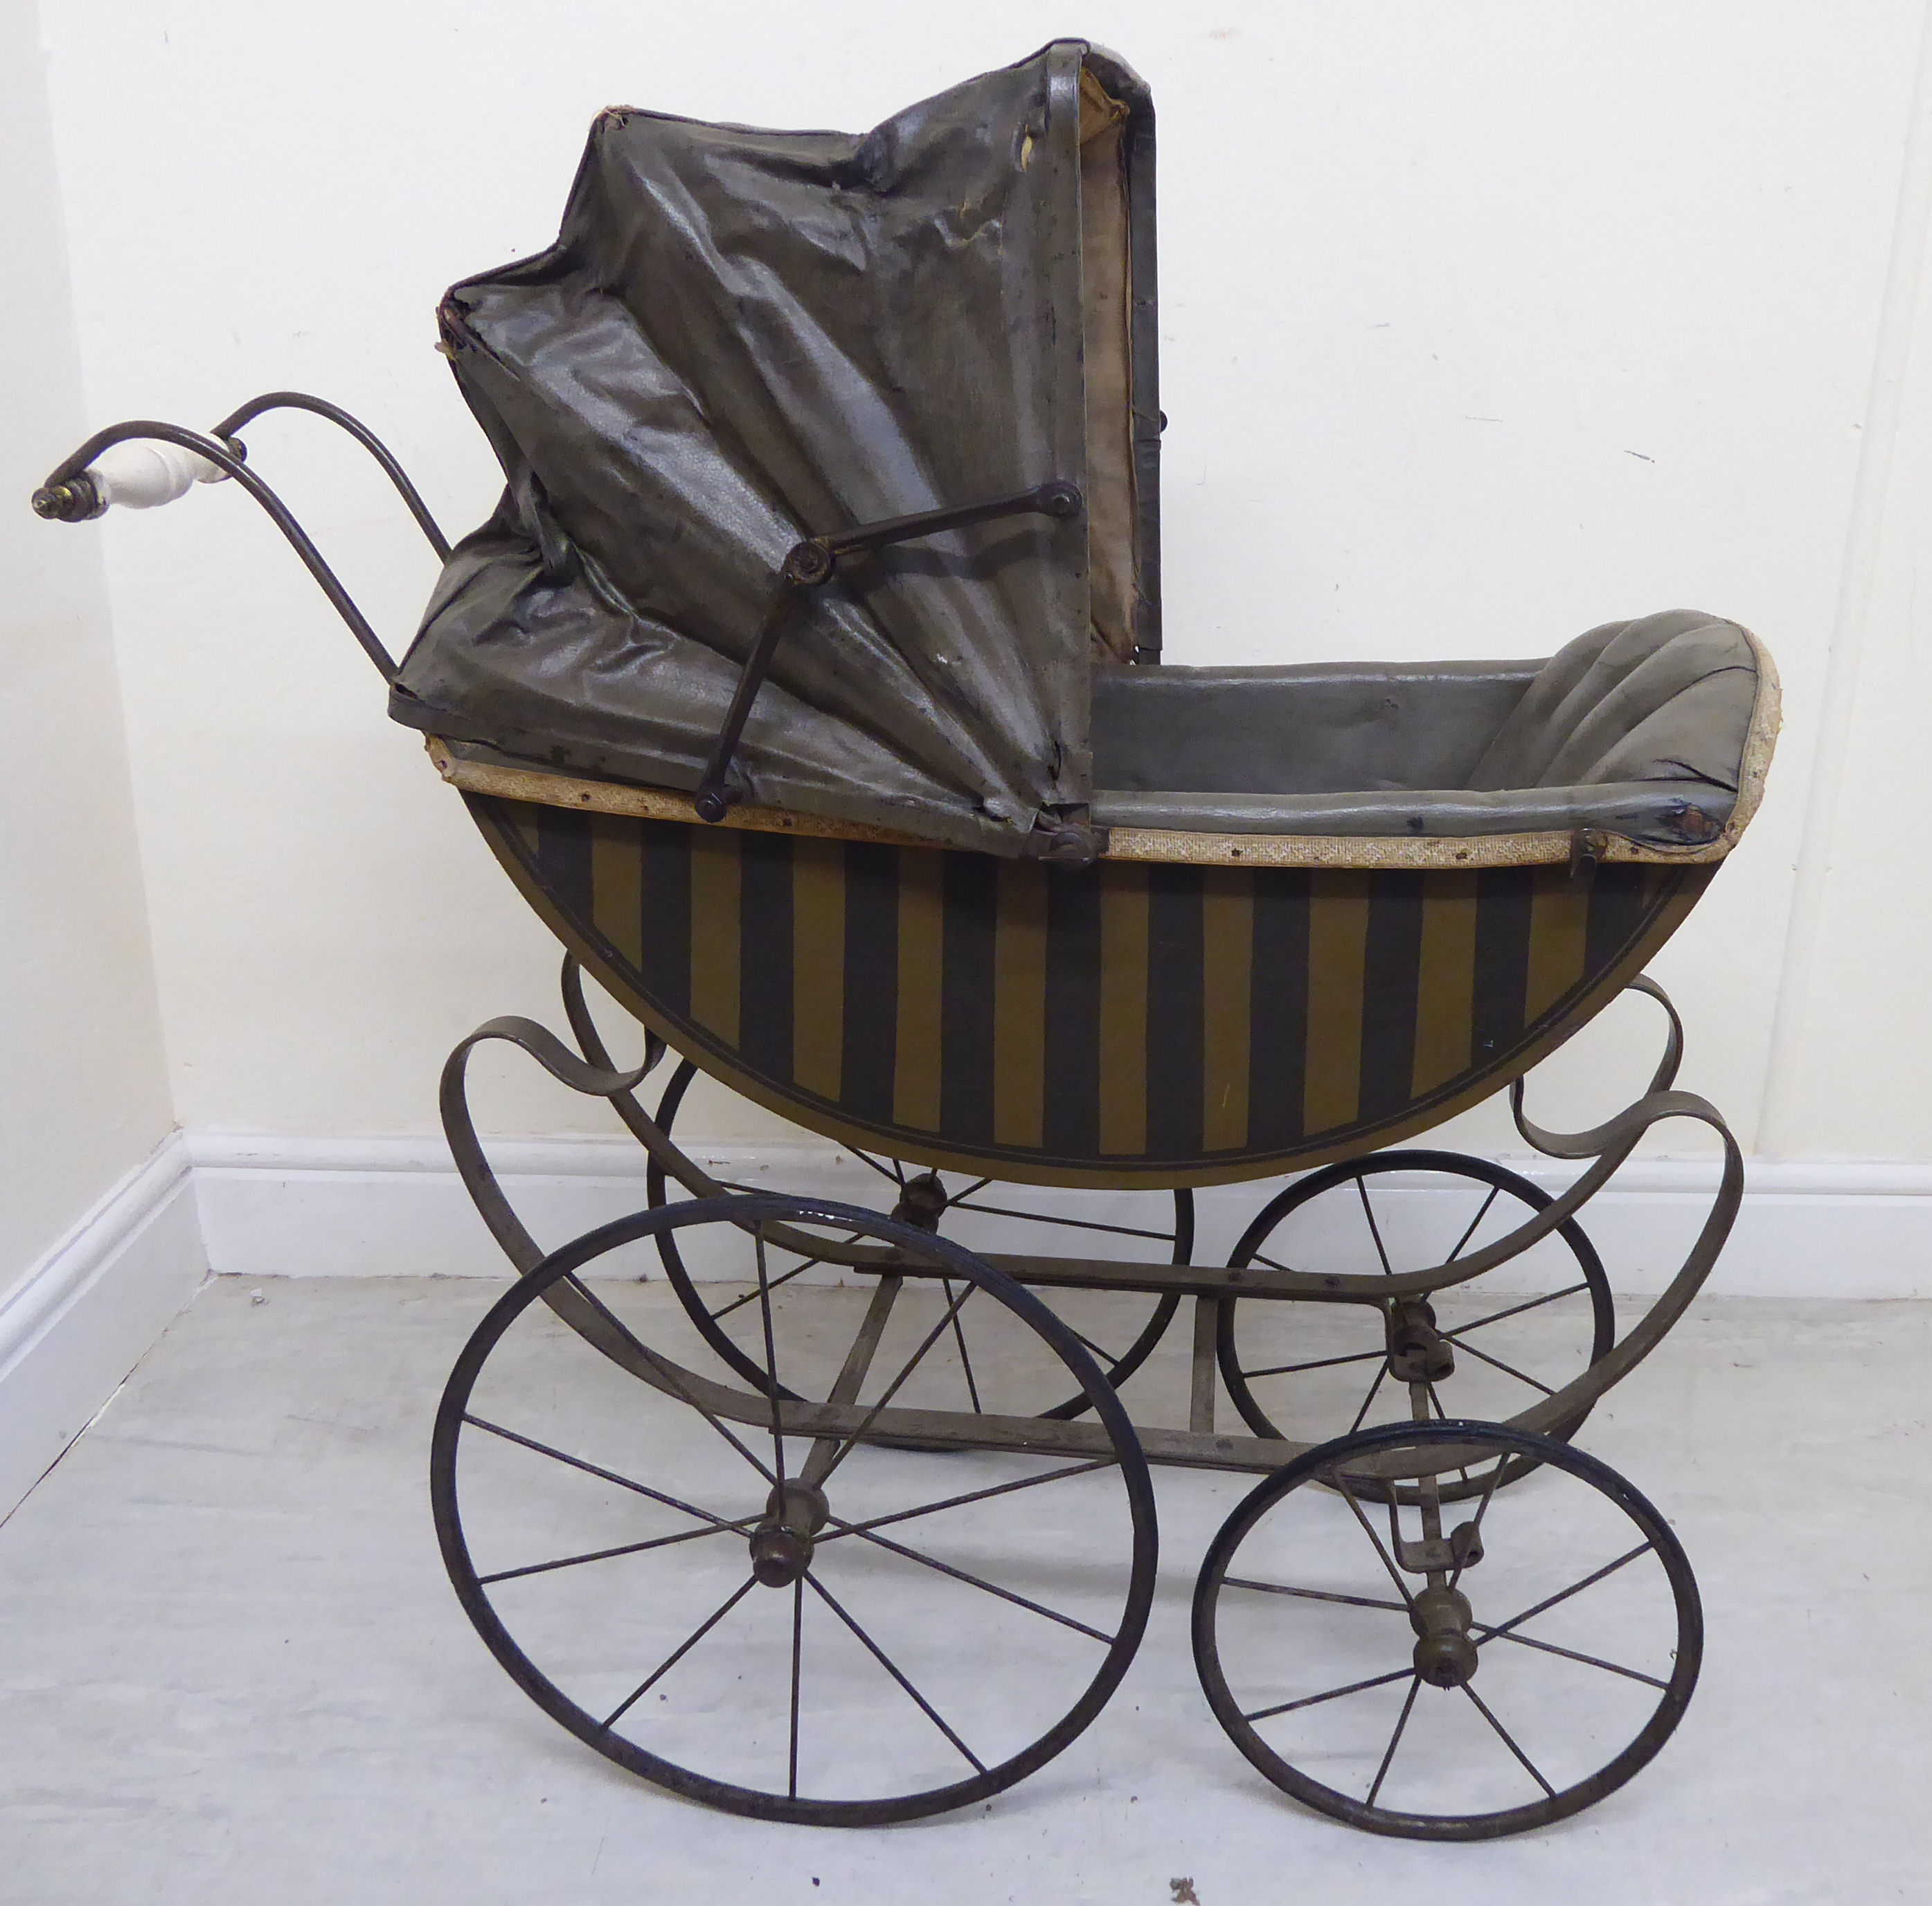 A late Victorian painted wooden dolls pram with a retractable canopy and a grey hide upholstered - Image 5 of 8